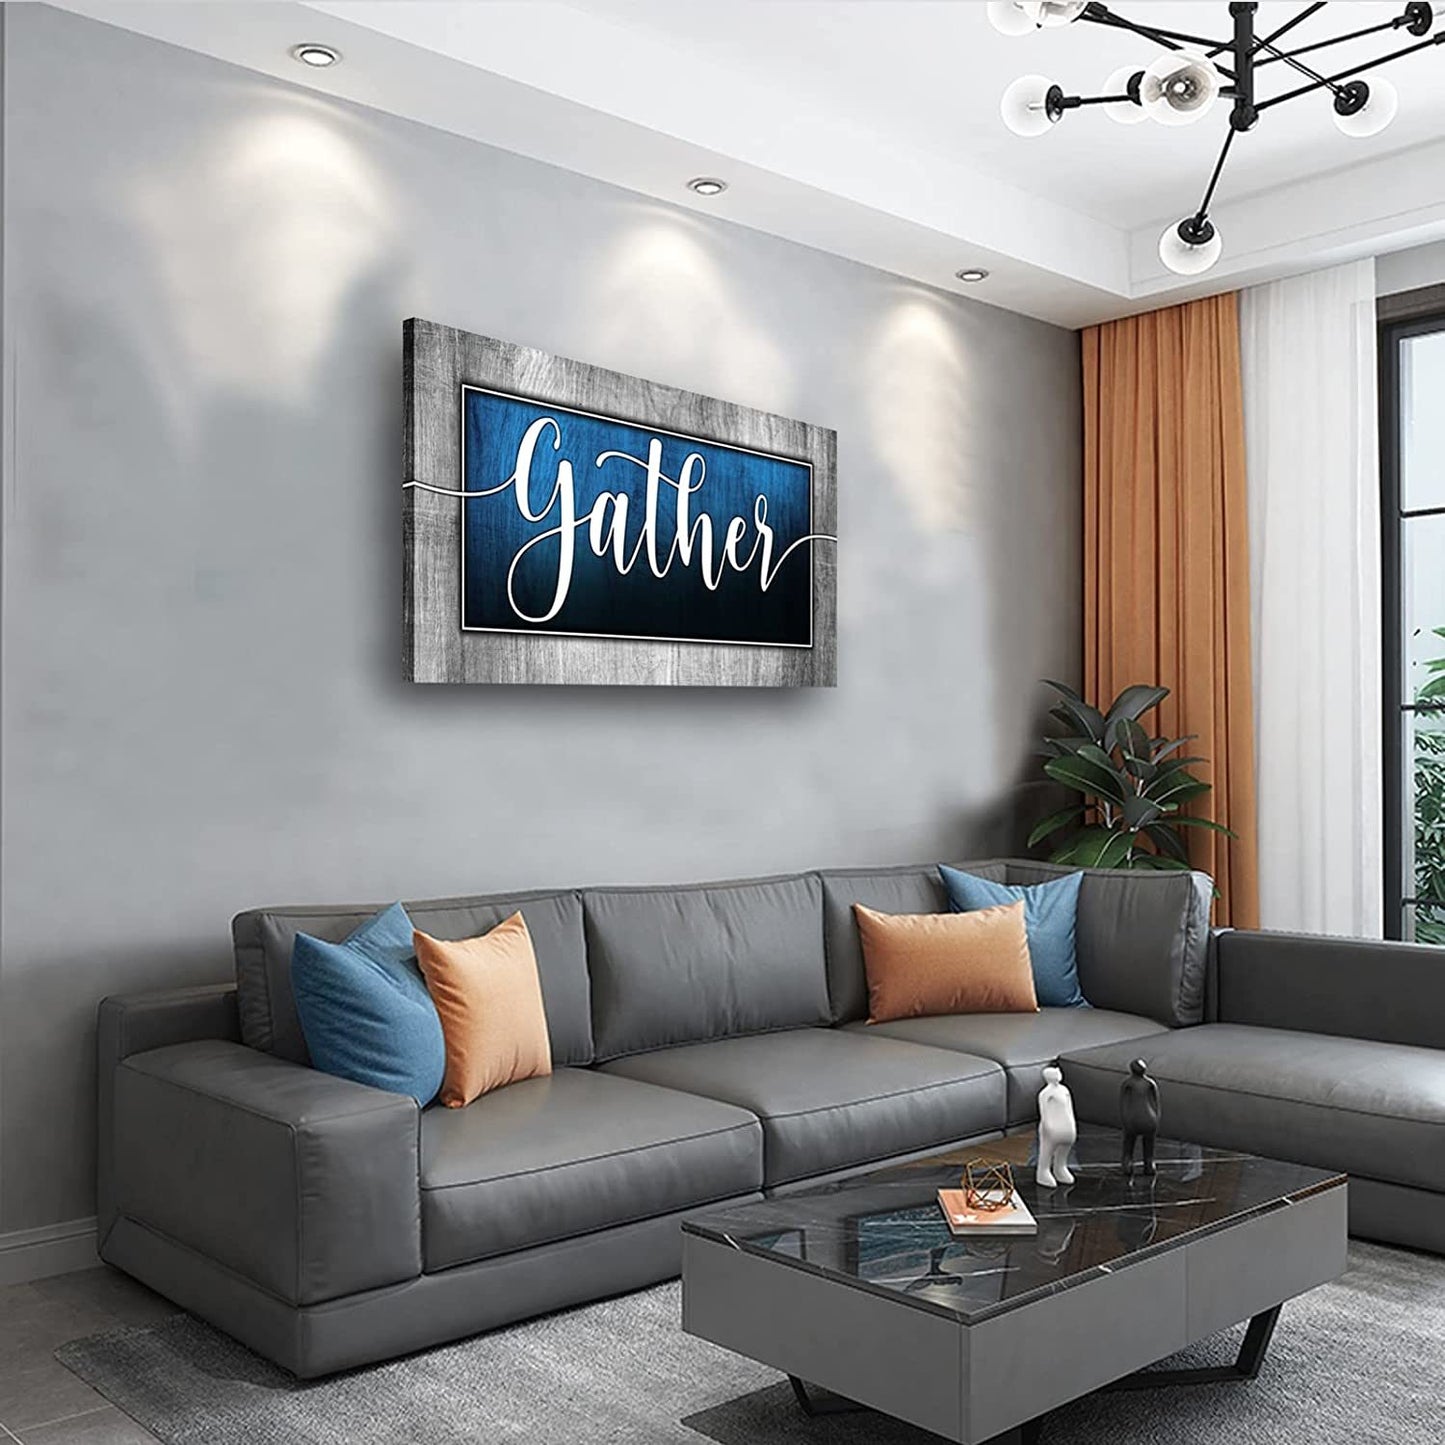 Gather Signs for Home Decor|Gather Wall Decor|Blue Canvas Print Poster Painting Picture Artwork|Dining Room Wall Decor|Ready to Hang 20"X40"